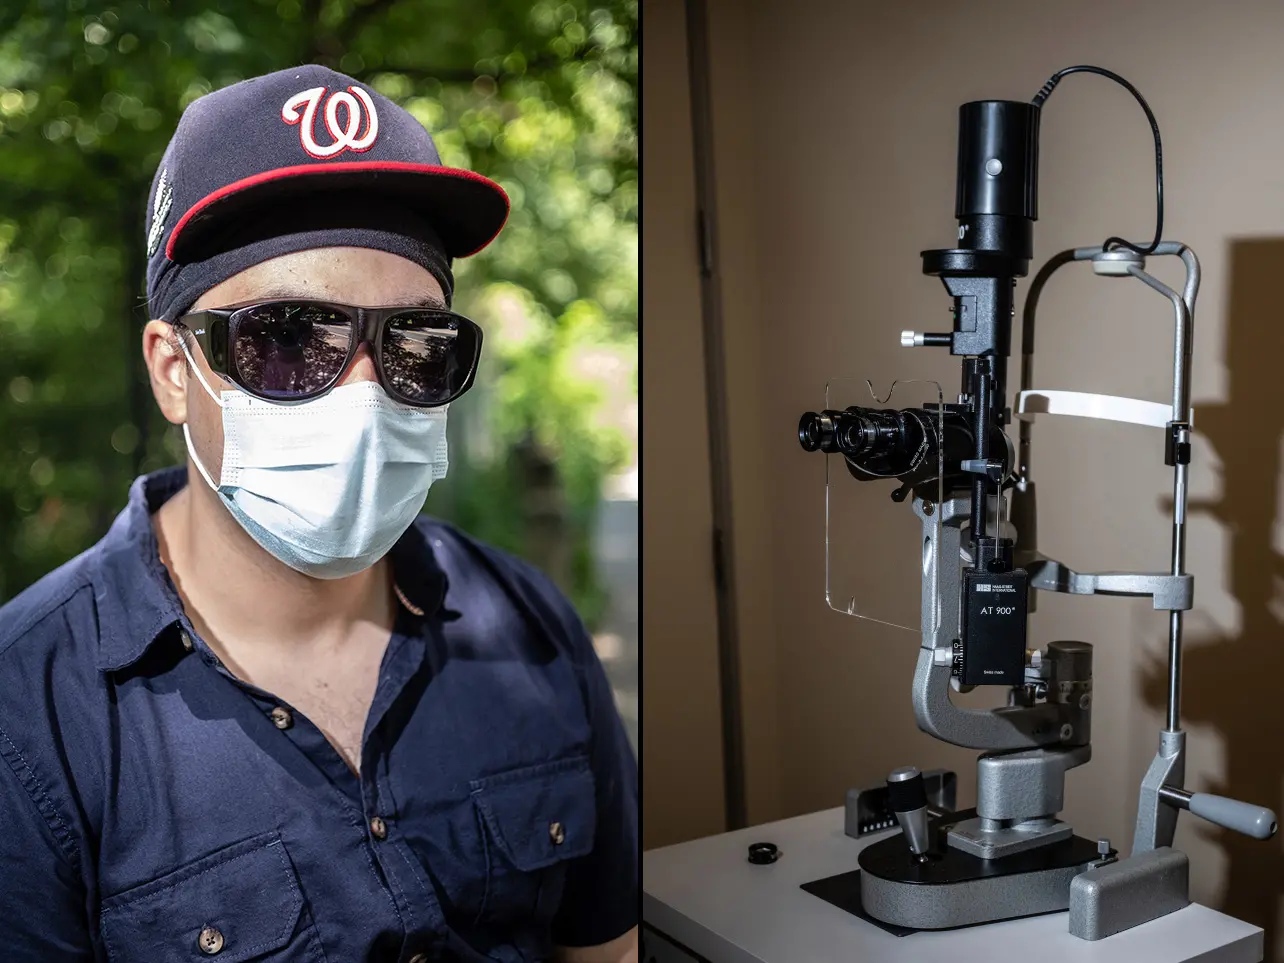 Left: A portrait of Matthew Leo Cima wearing sunglasses and a medical face mask. Right: A machine used to examine retinas.